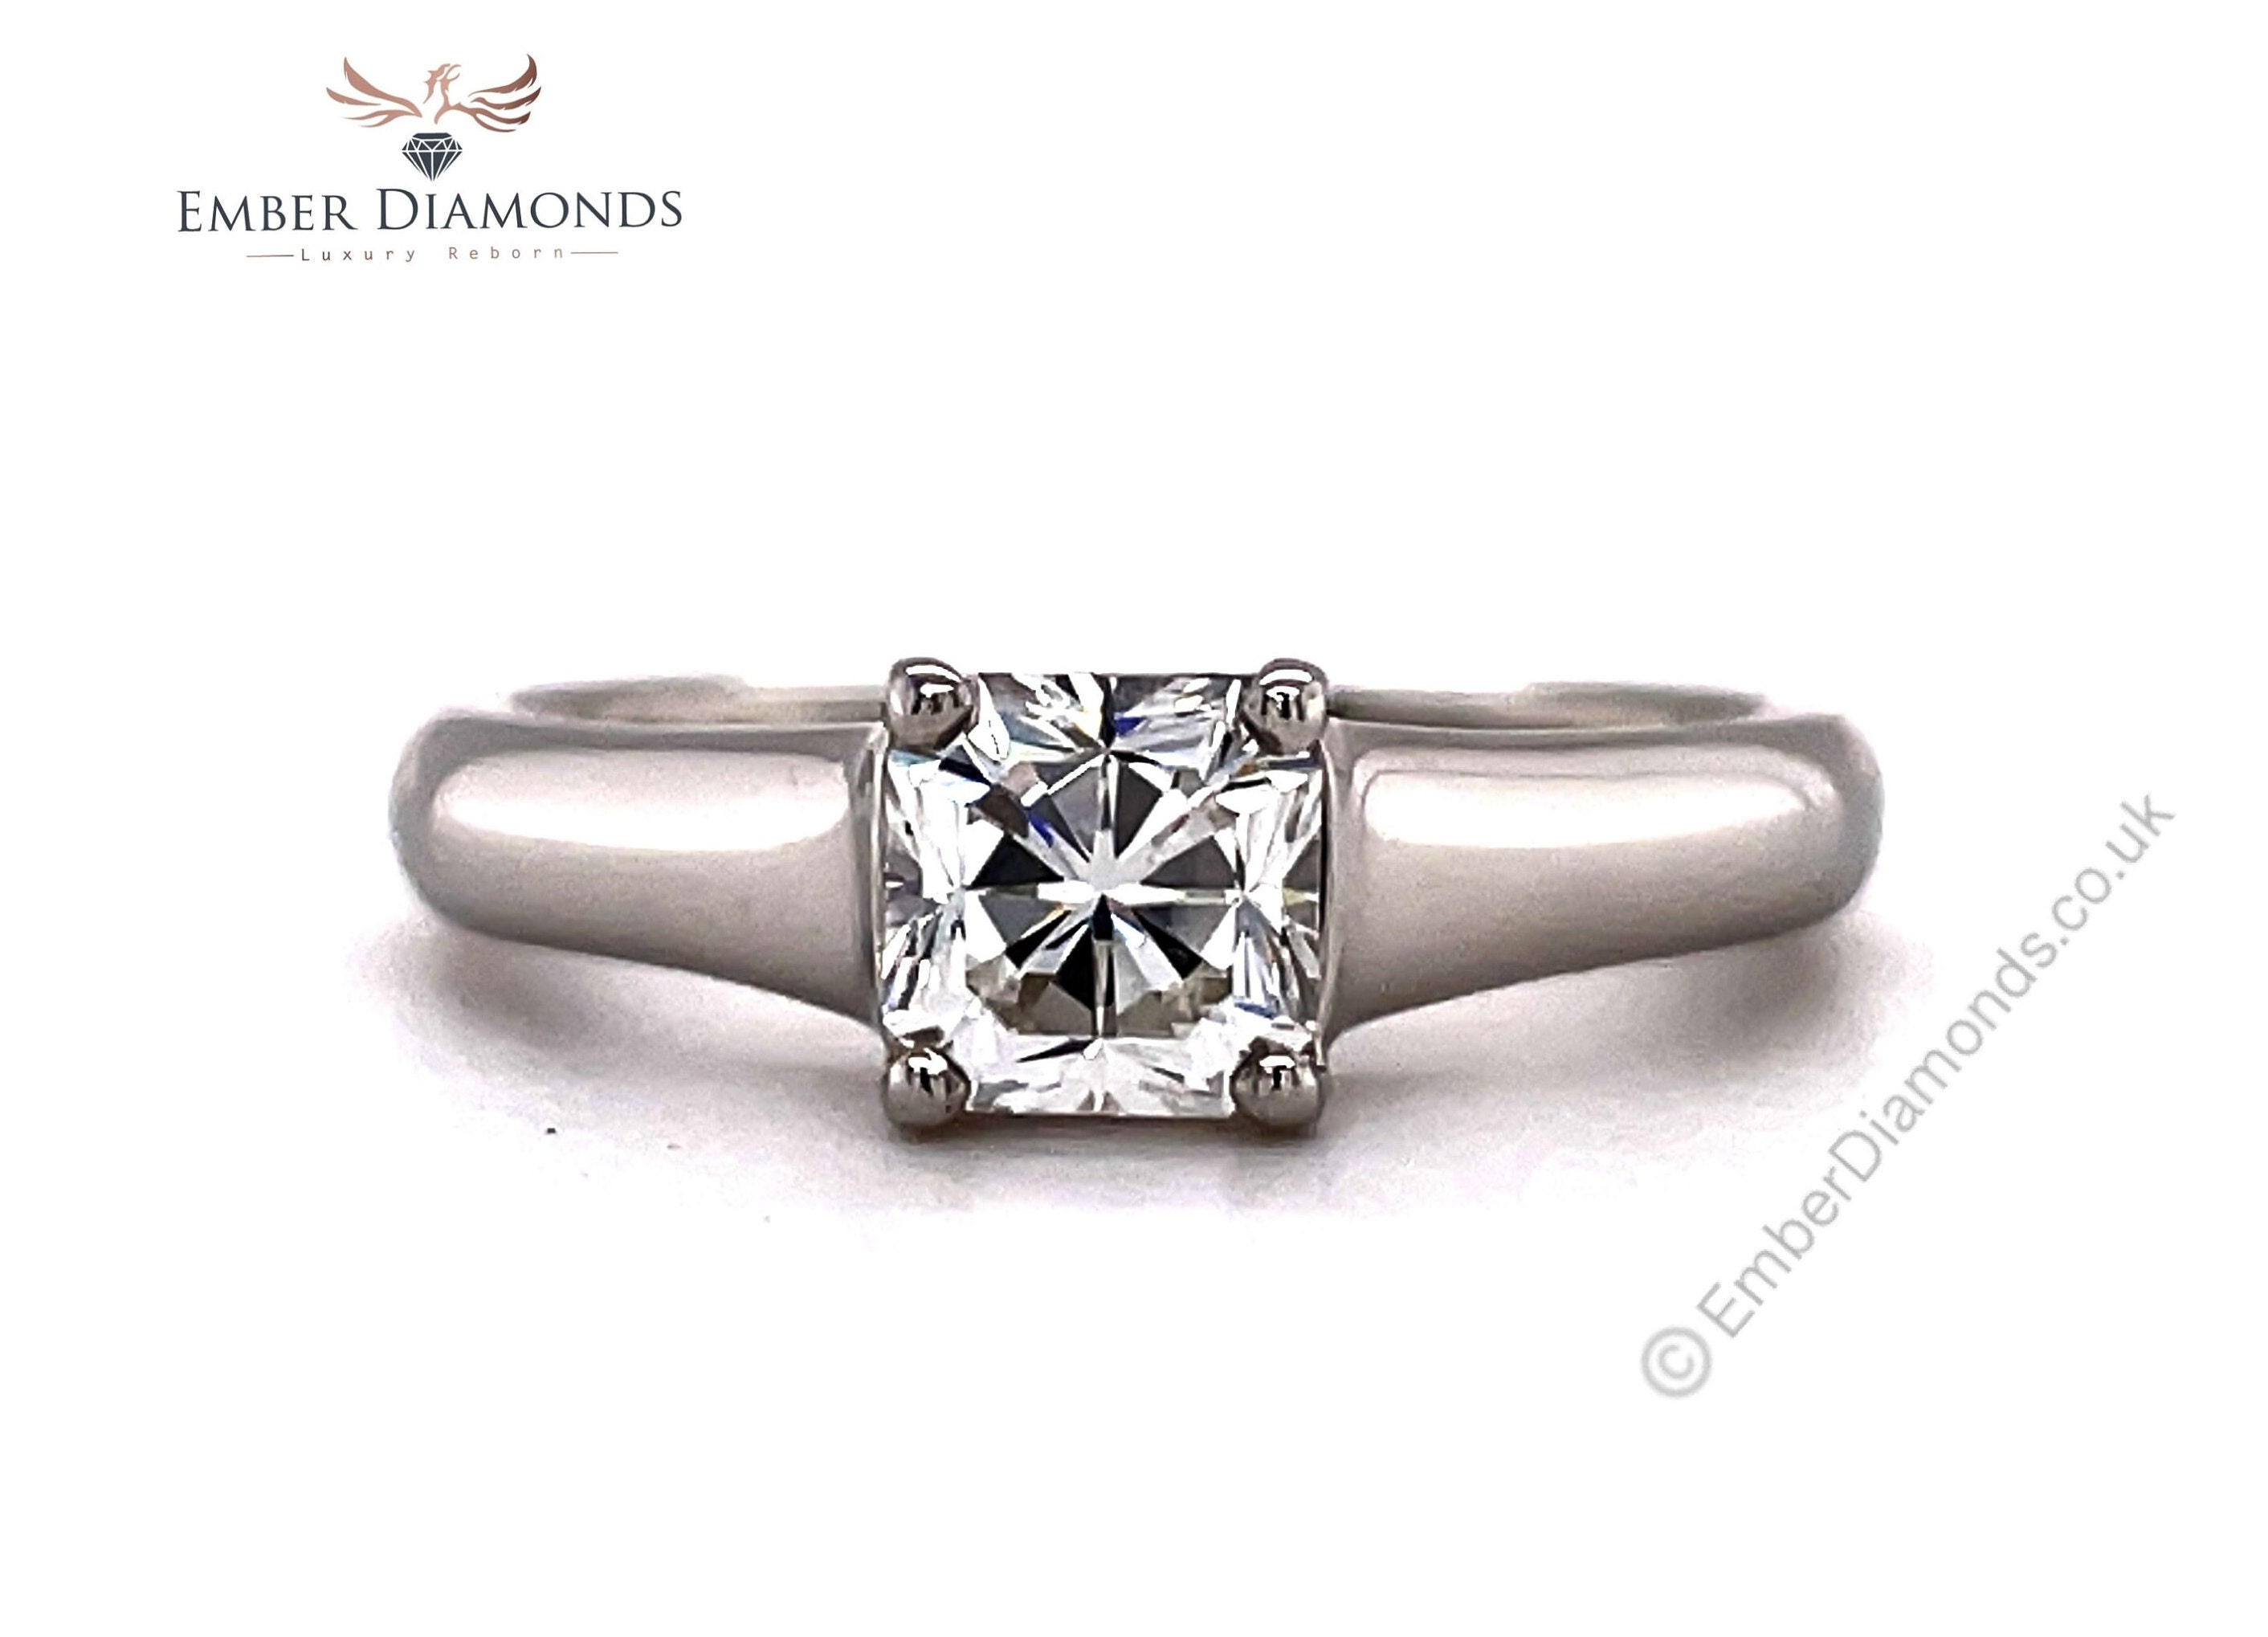 Solitaire ring with a 2.00 carat diamond in white gold - BAUNAT